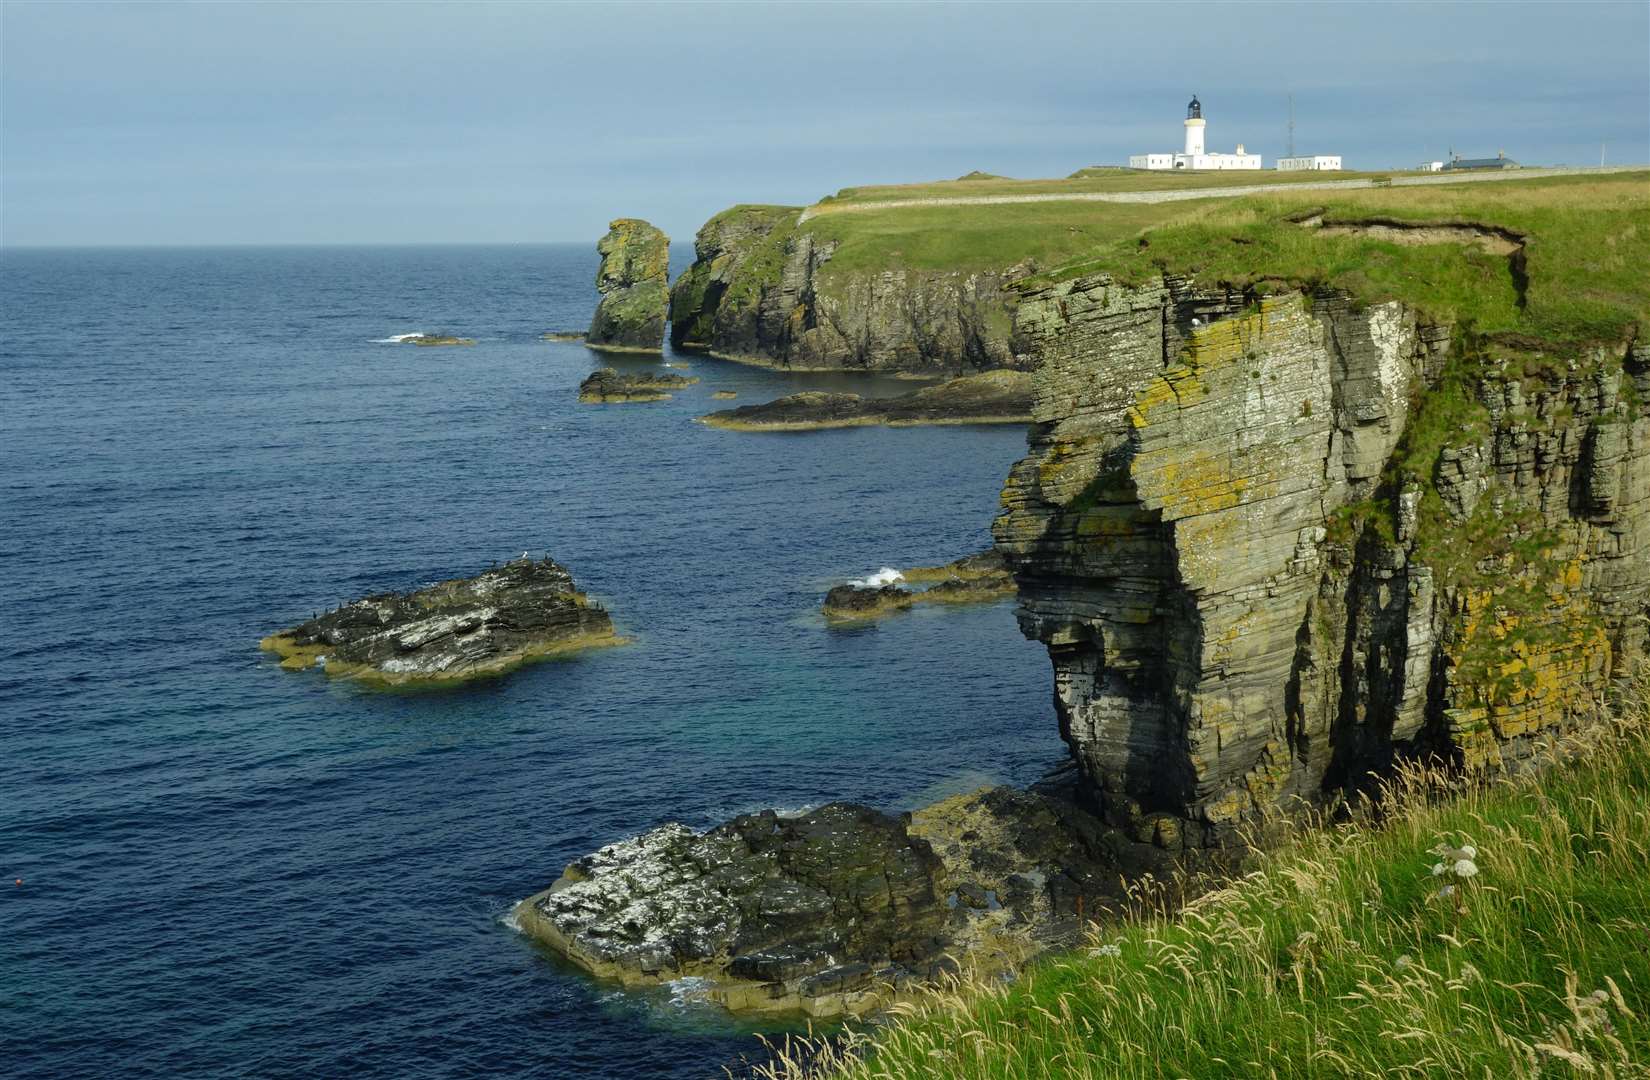 The alleged offence is said to have taken place in the Noss Head marine-protected conservation area.